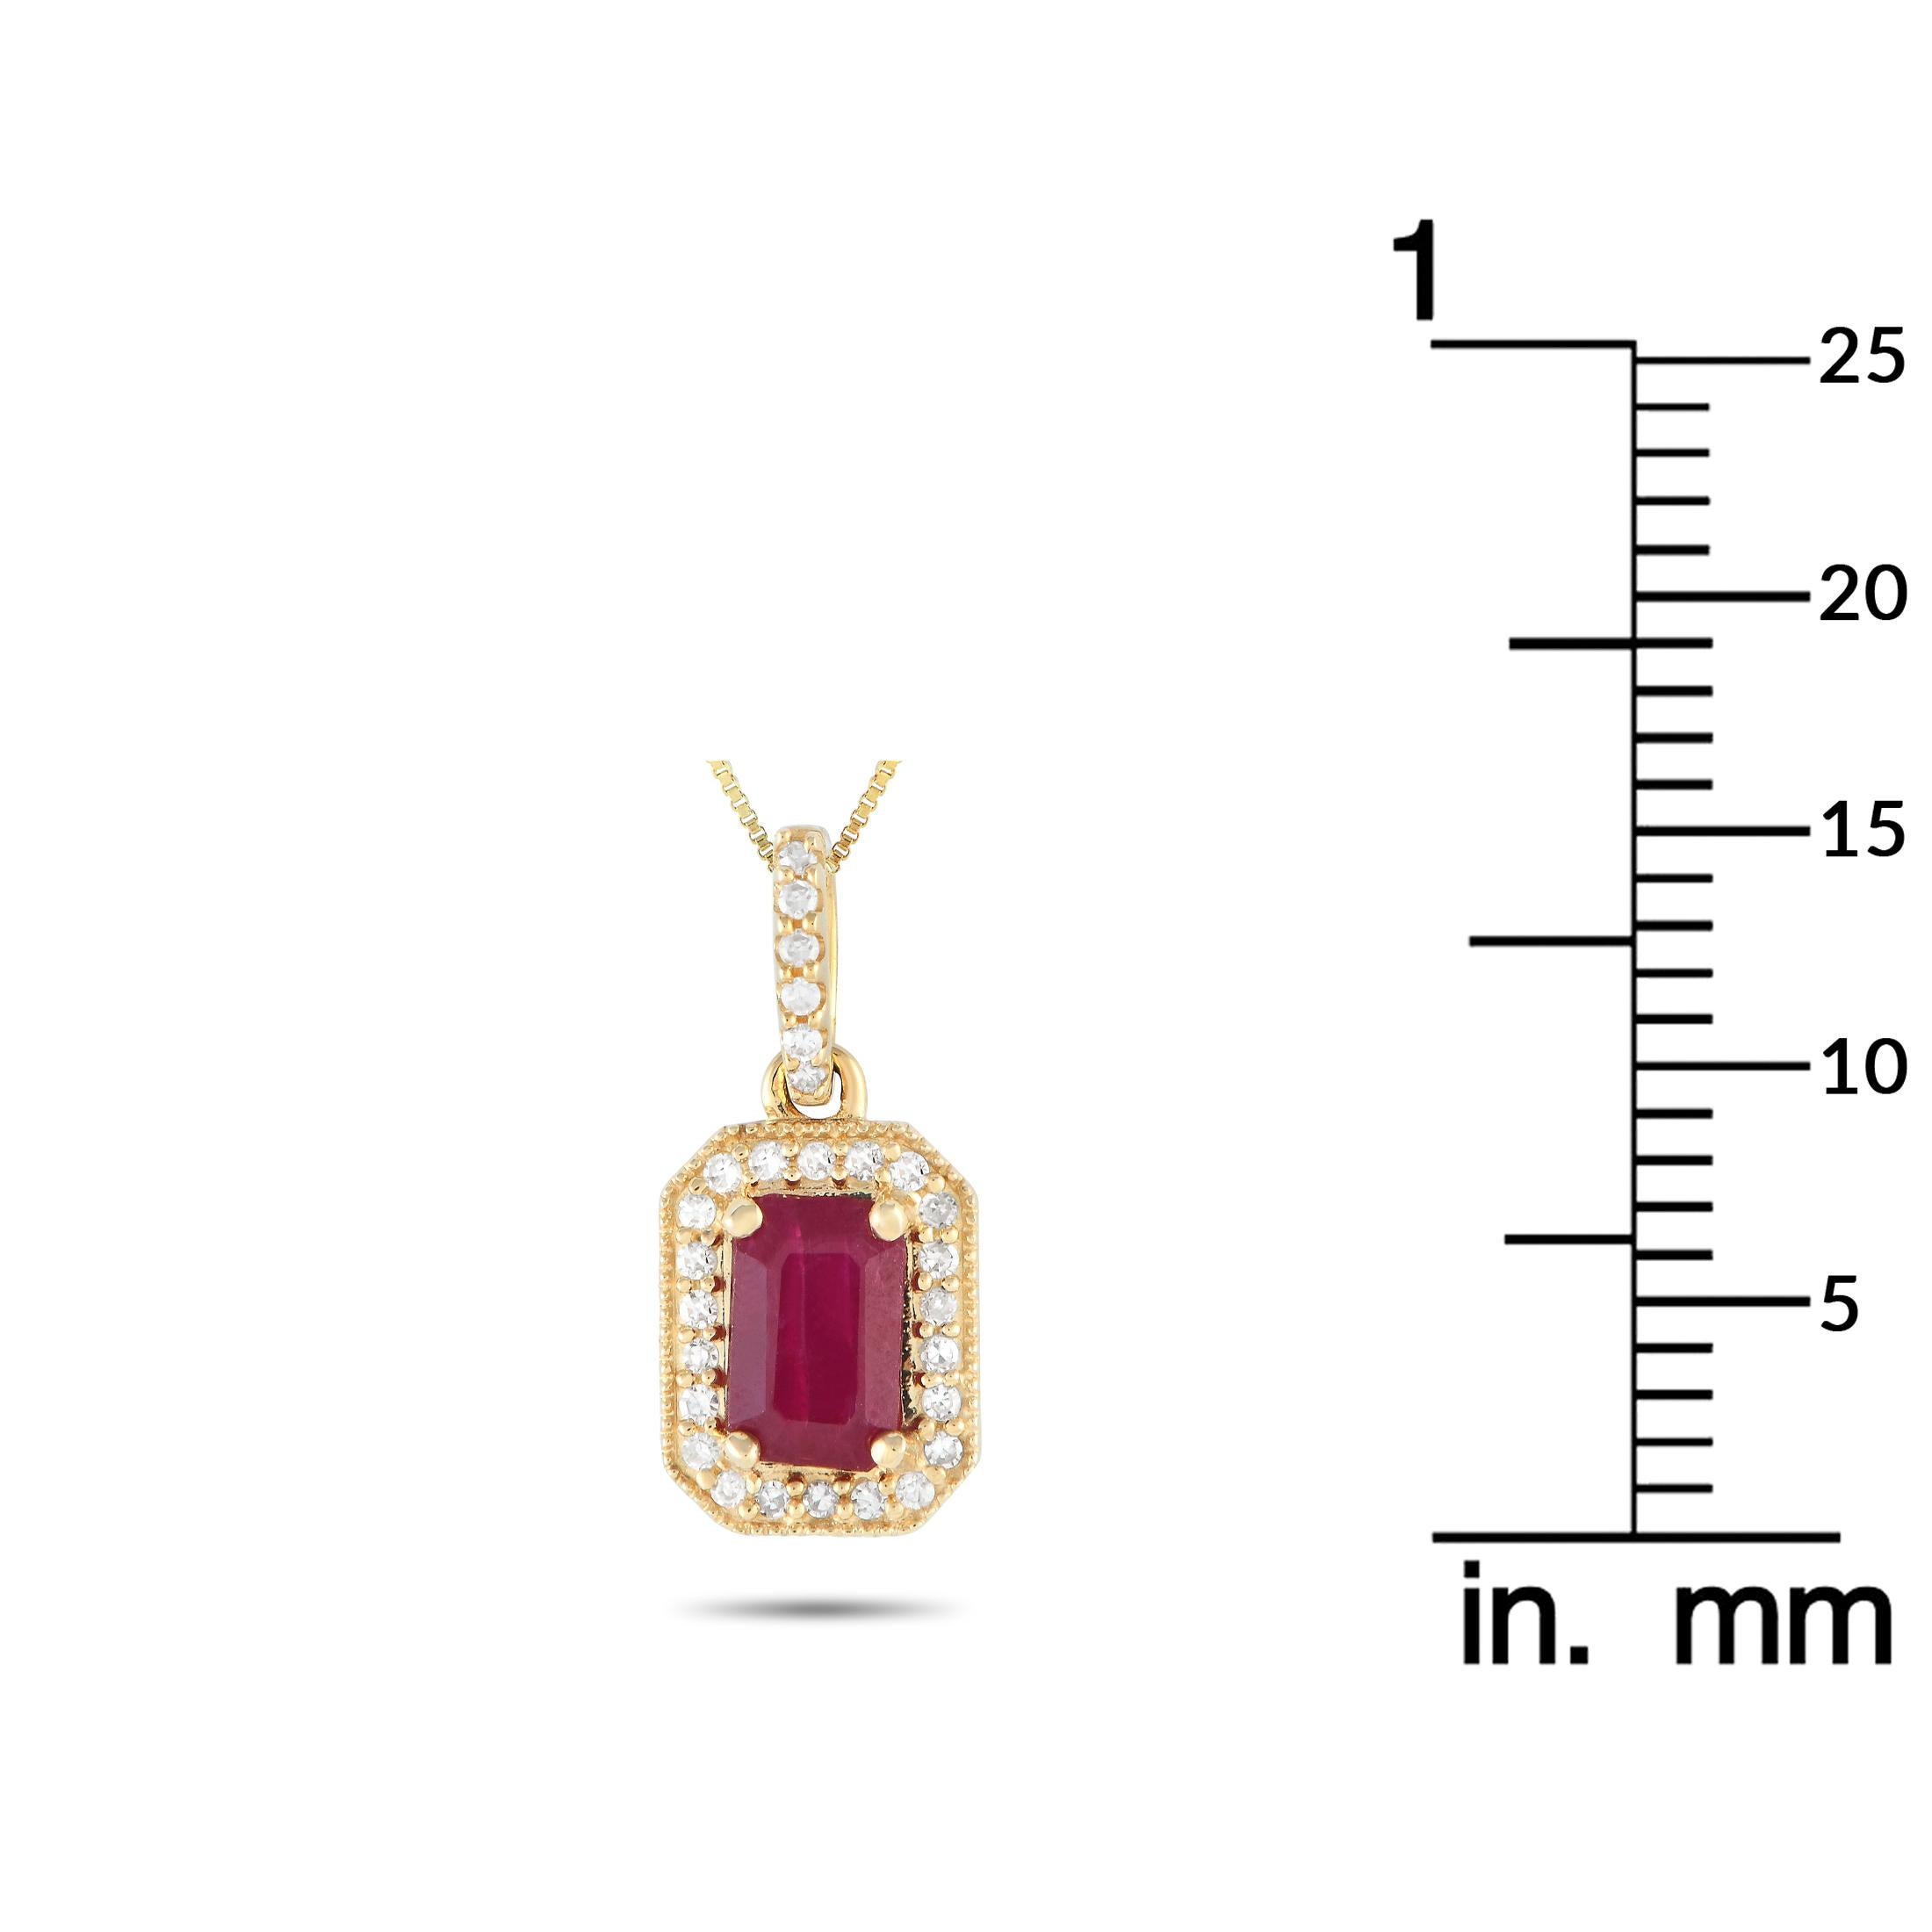 LB Exclusive 14K Yellow Gold 0.10ct Diamond & Ruby Pendant Necklace PD4-16050YRU In New Condition For Sale In Southampton, PA